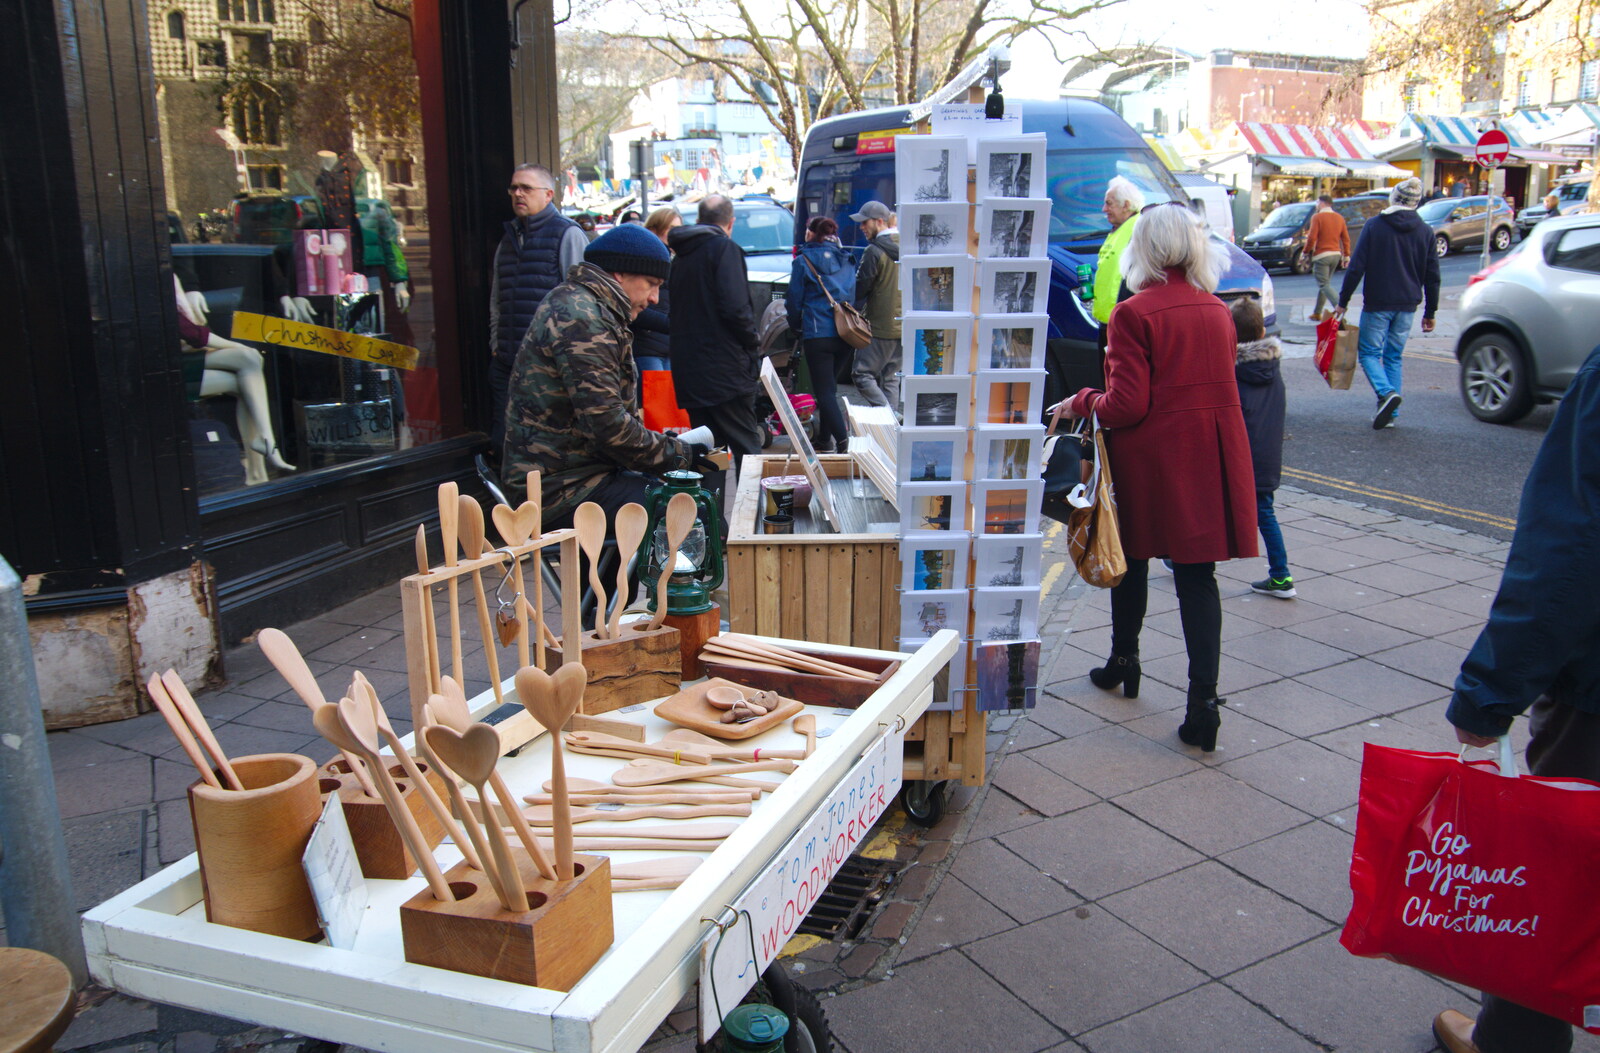 Tom Jones the woodworker and his spoons from A Spot of Christmas Shopping, Norwich, Norfolk - 23rd December 2019